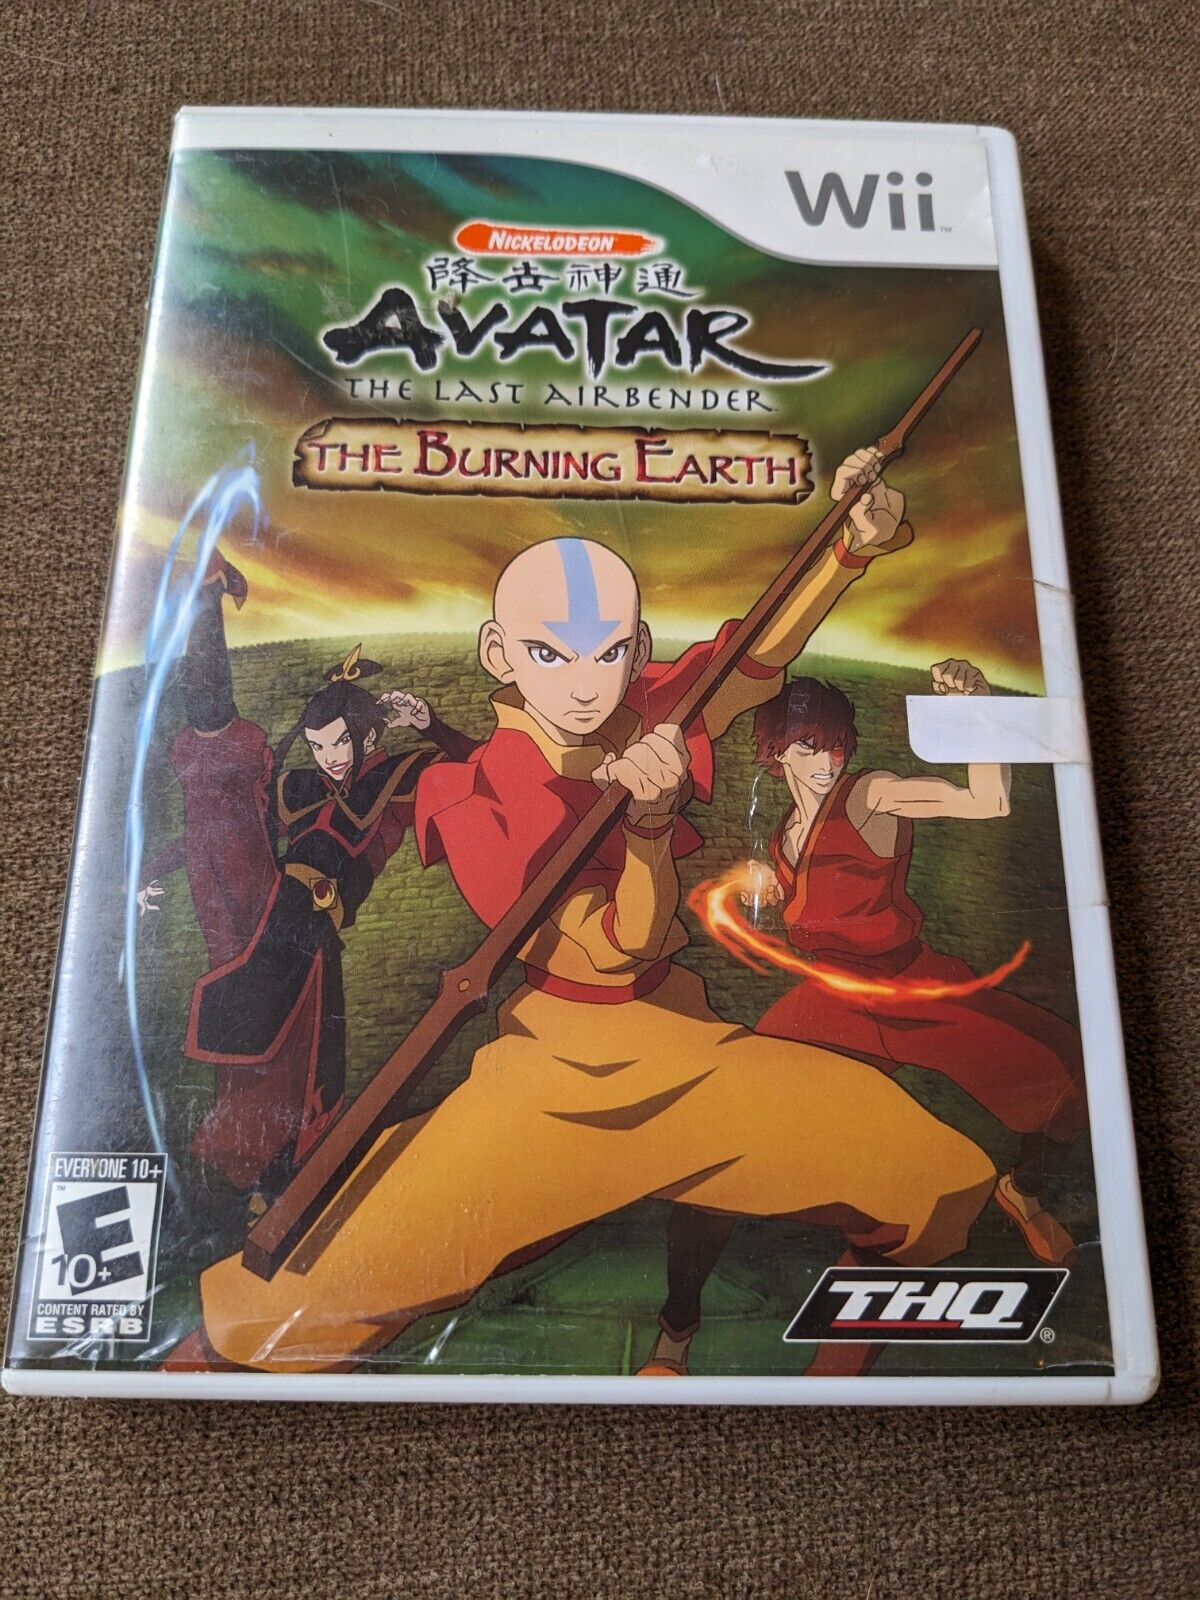 Avatar: The Last Airbender - The Burning Earth (Nintendo Wii, 2007)